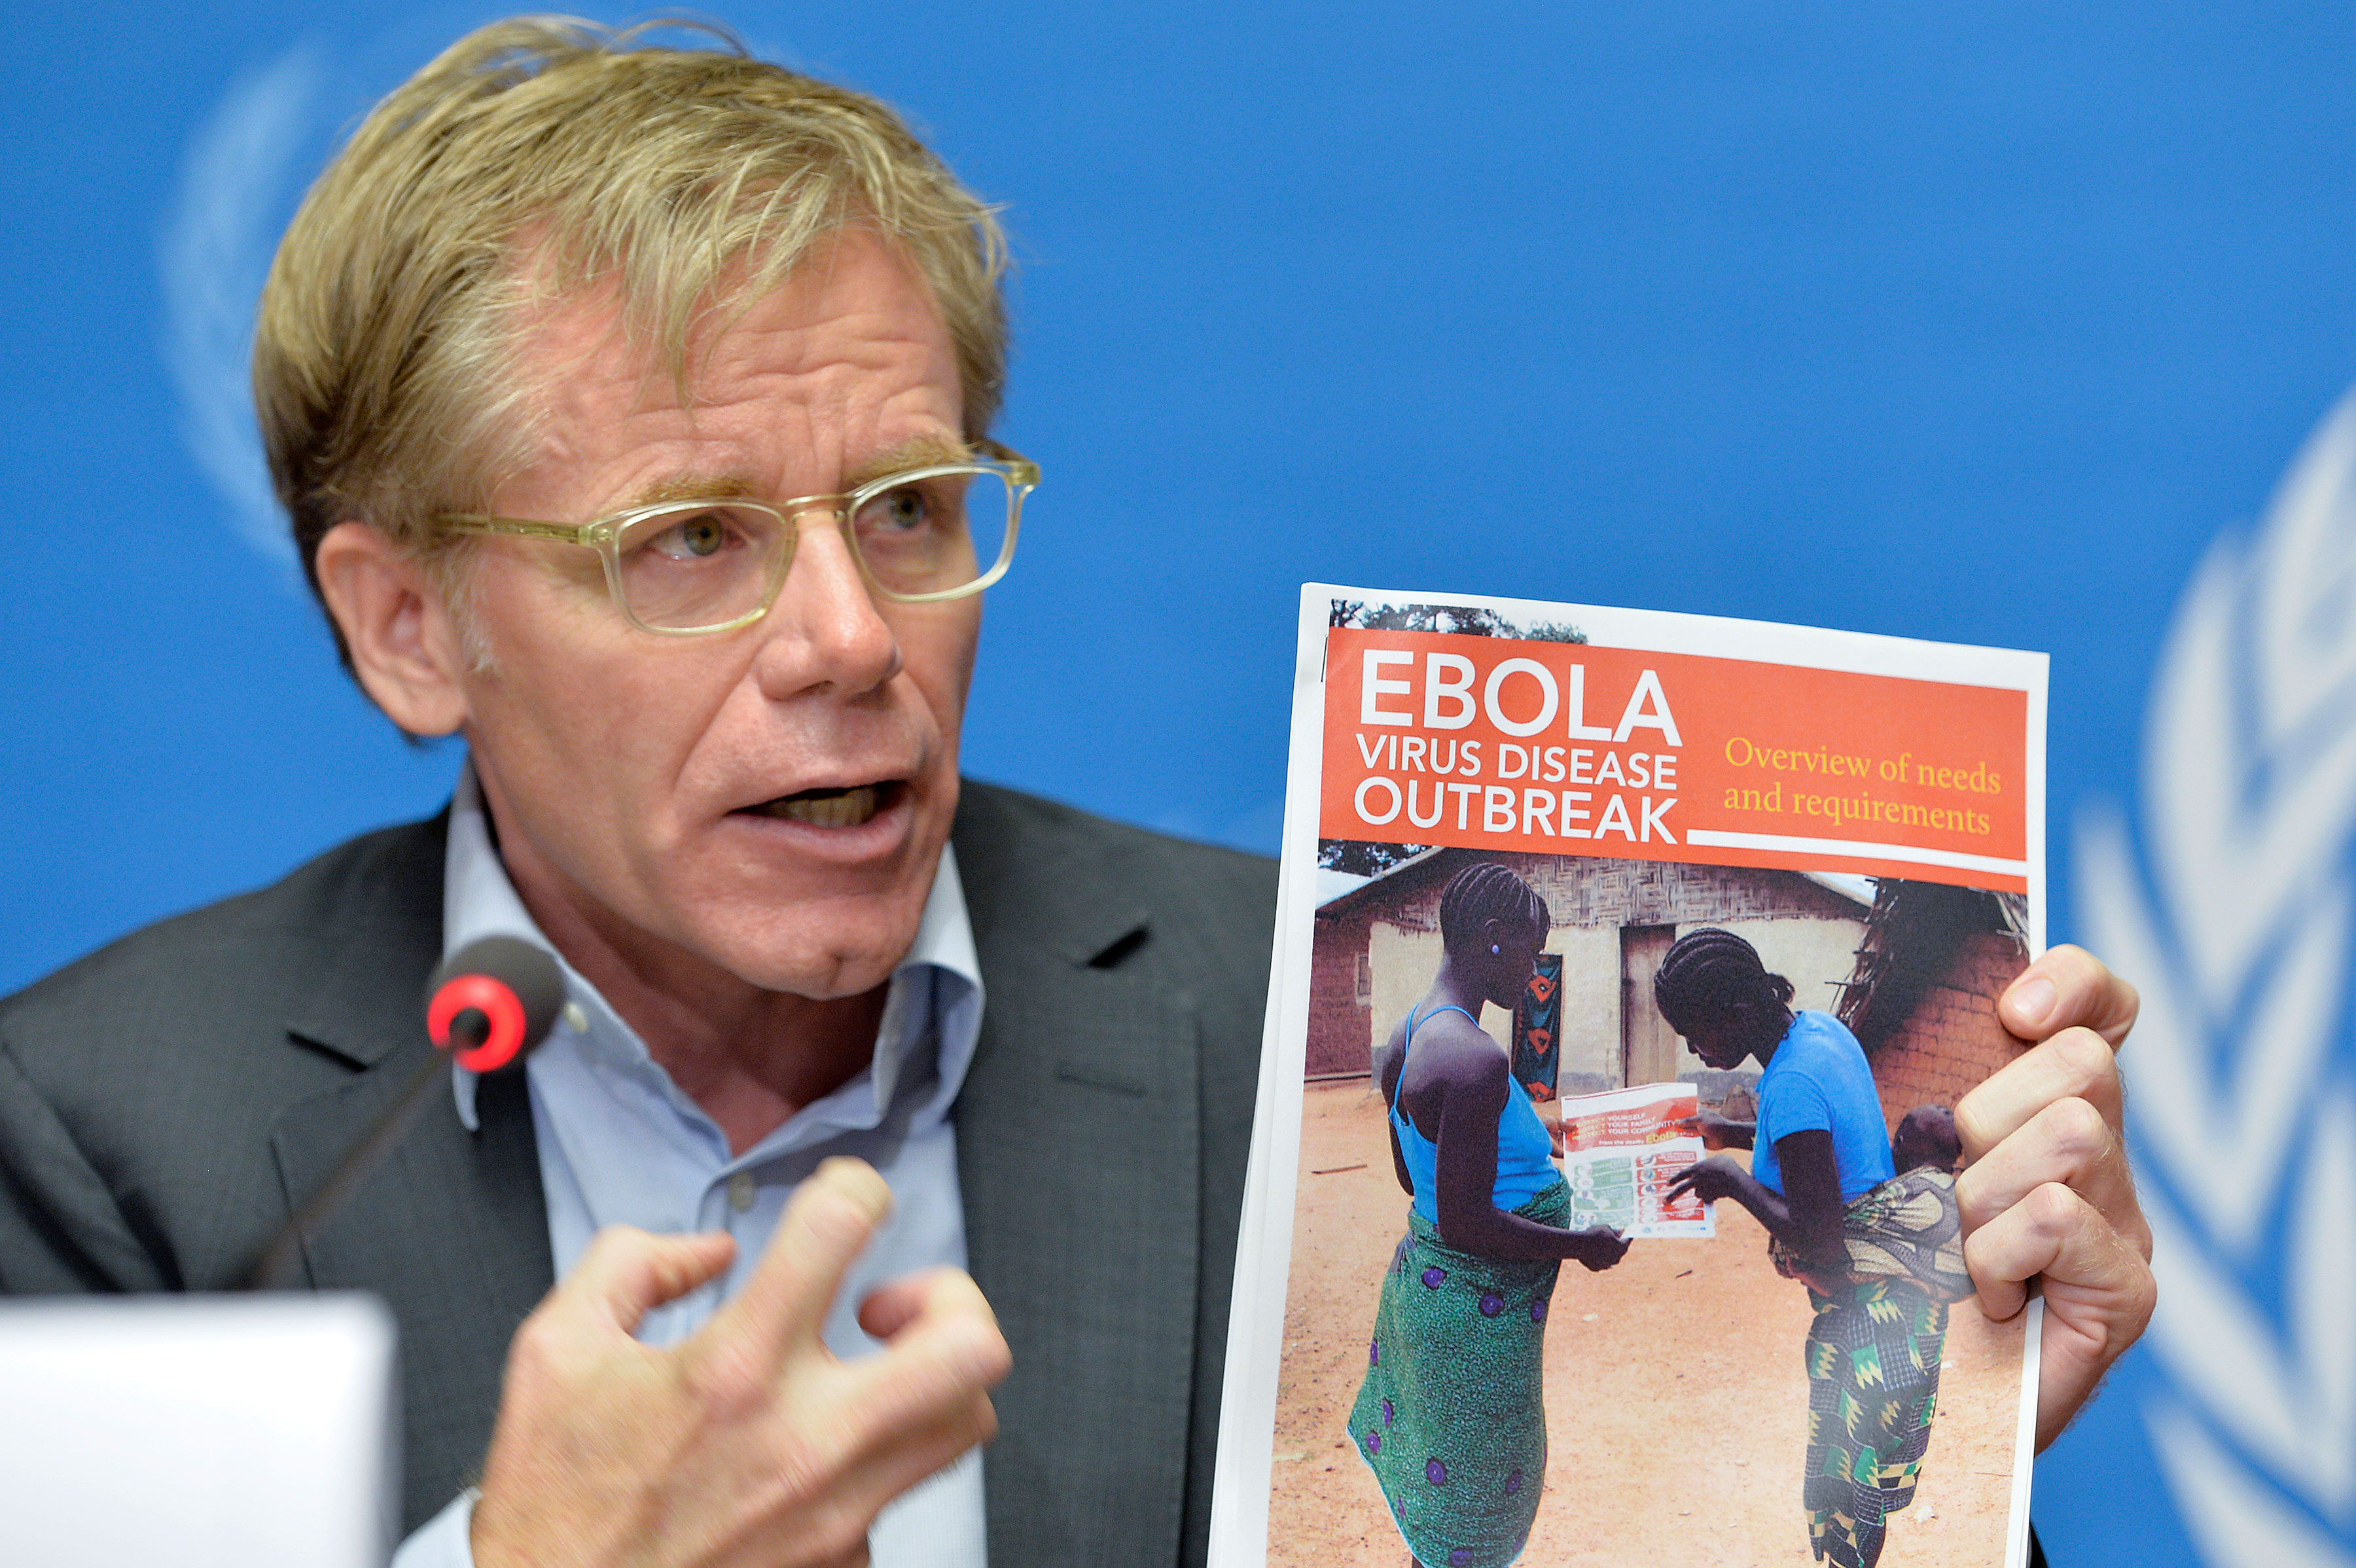 Dr. Bruce Aylward delivers his plan for an international response to the West Africa Ebola outbreak at a September 2014 press conference at the World Health Organization at Geneva. The first step in dealing with an emergency, says Aylward, “is break down the unknown, because we actually know a lot more than we often recognize that we know.” (U.N. photo by Jean-Marc Ferré)